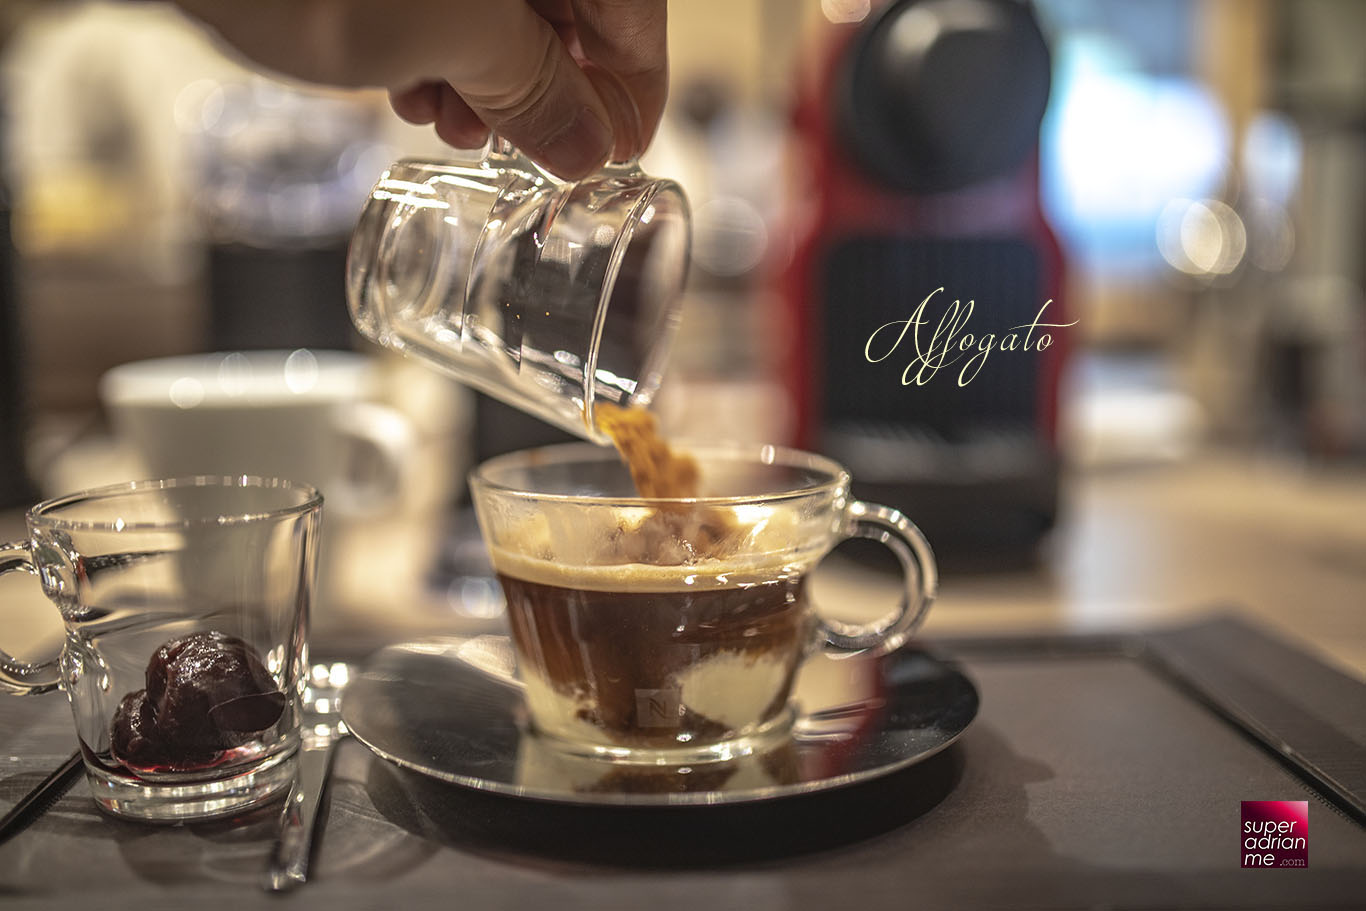 Make your own Affogato at home with the Nespresso Caramelito capsule